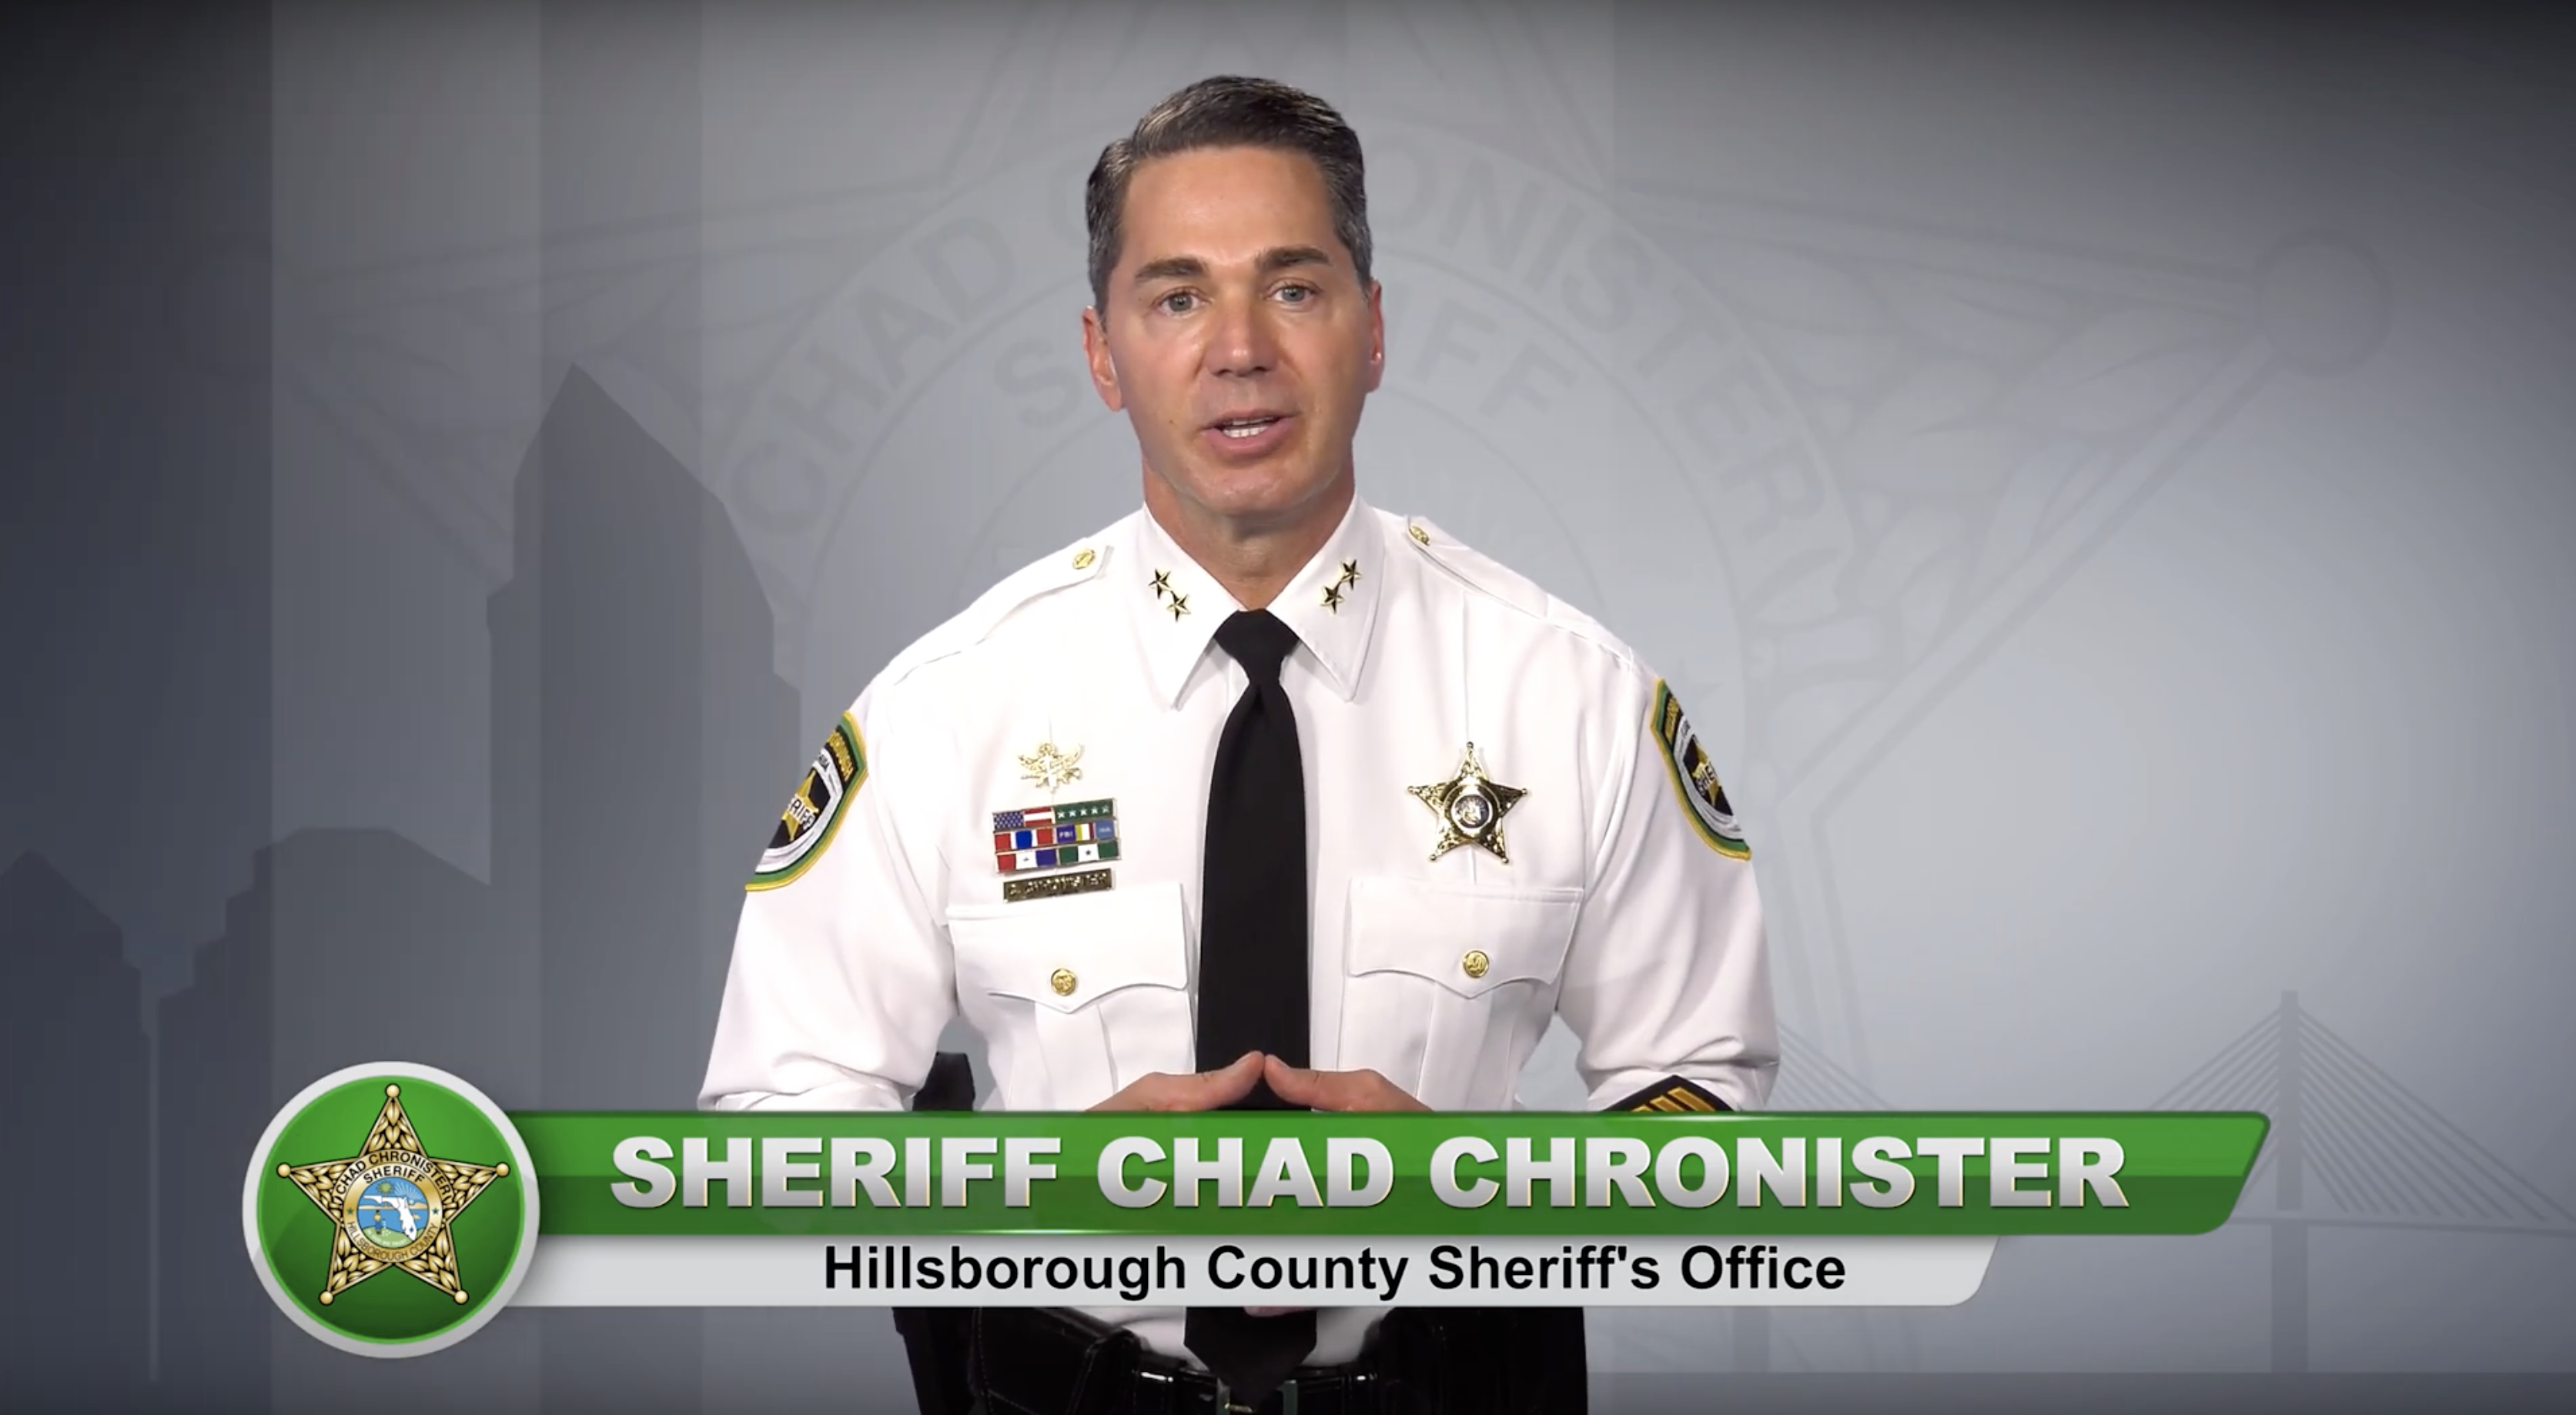 Sheriff Chad Chronister reminds residents: “If you see something, say something”